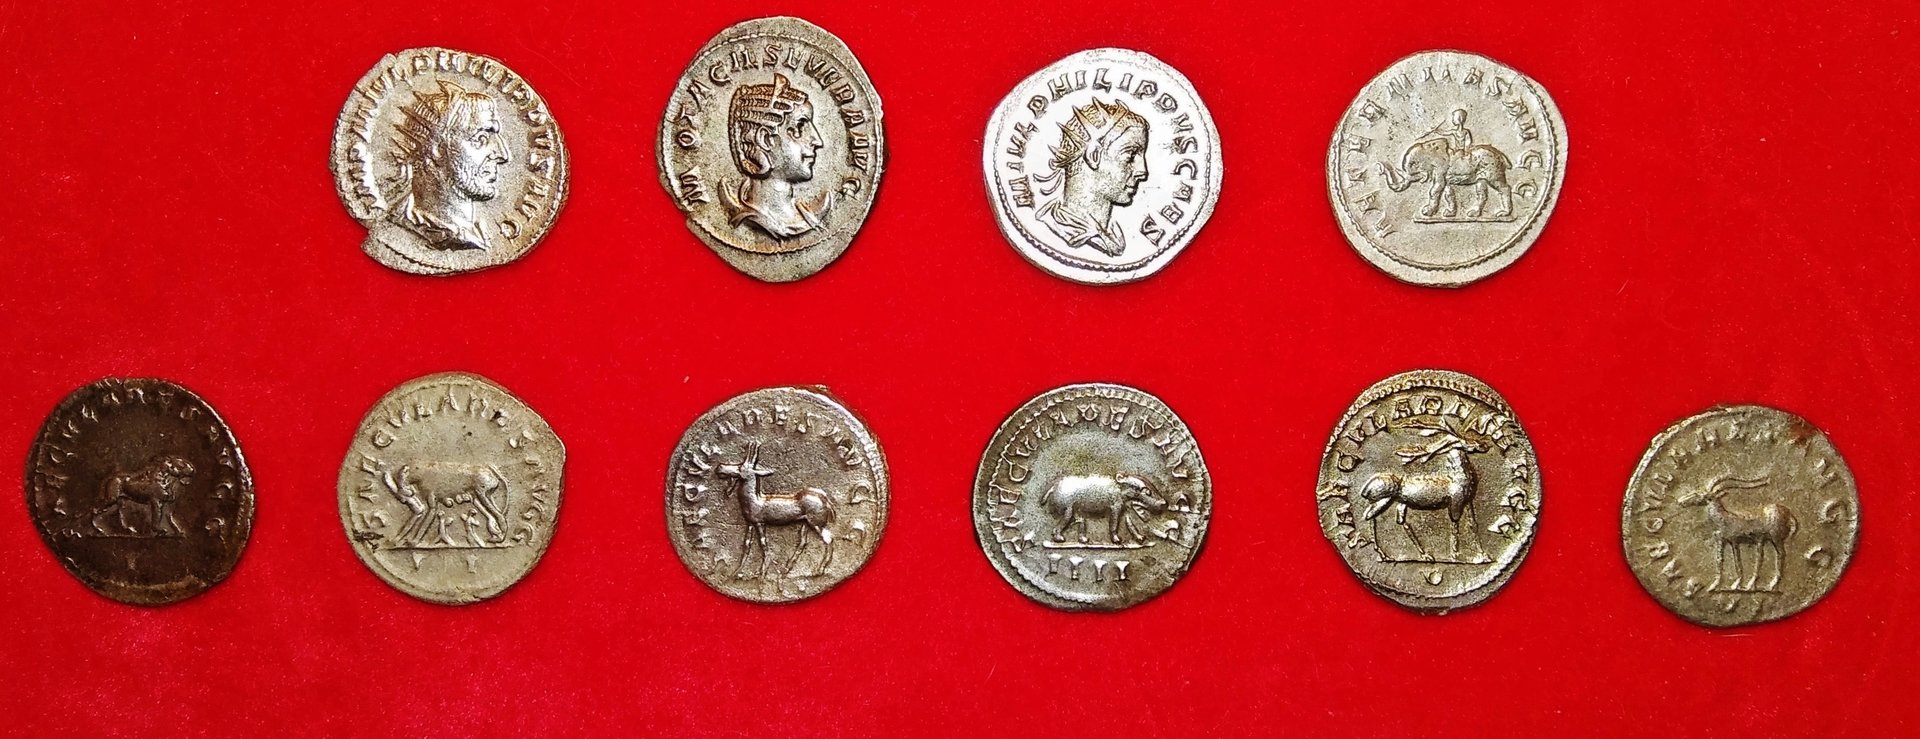 Philip I & family coins with animal reverses 2.jpg